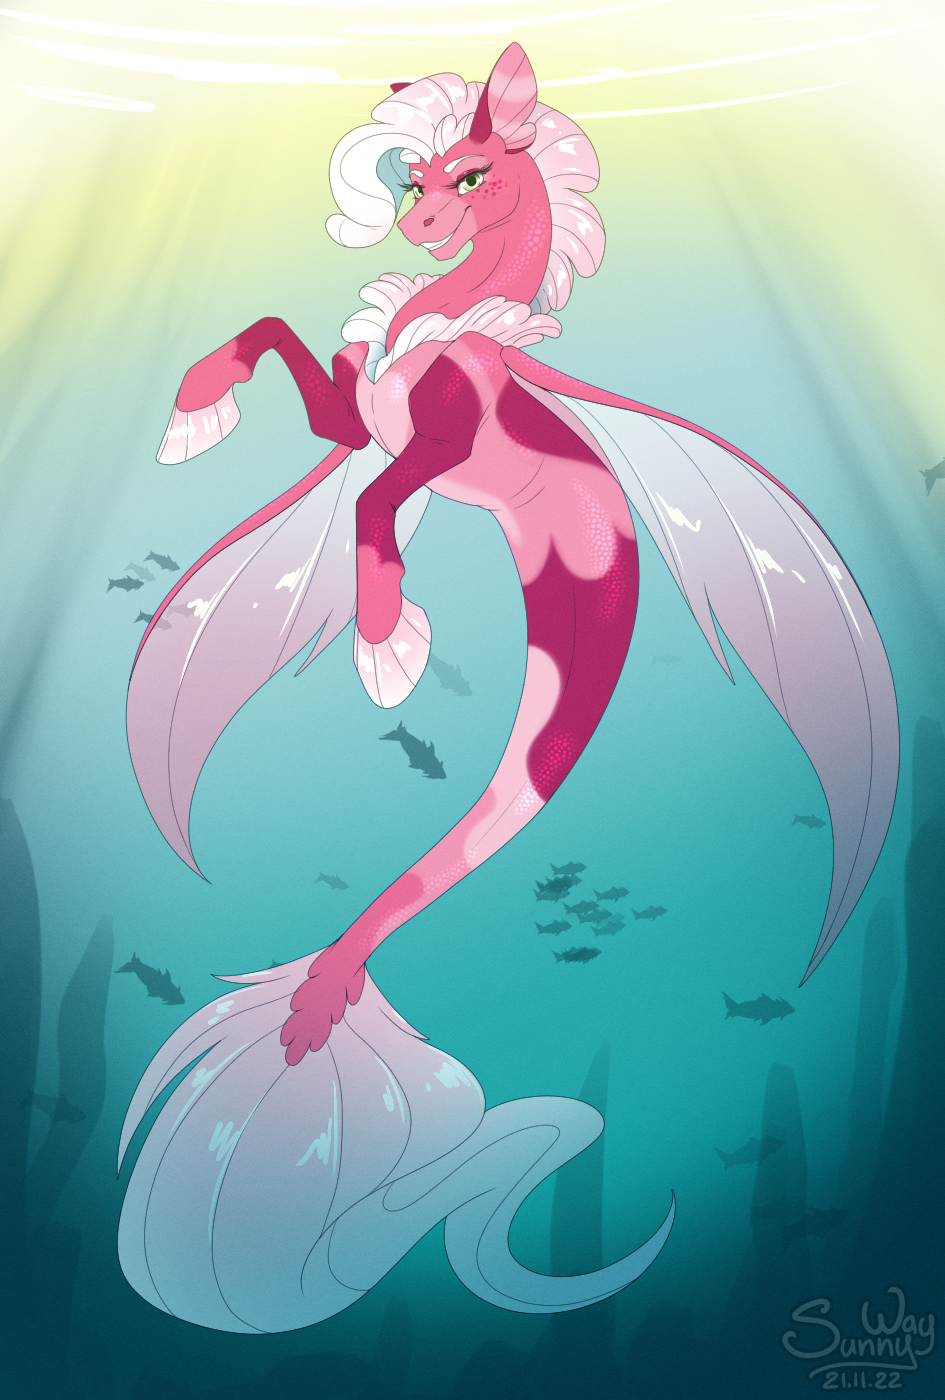 Beauty underwater | Commission